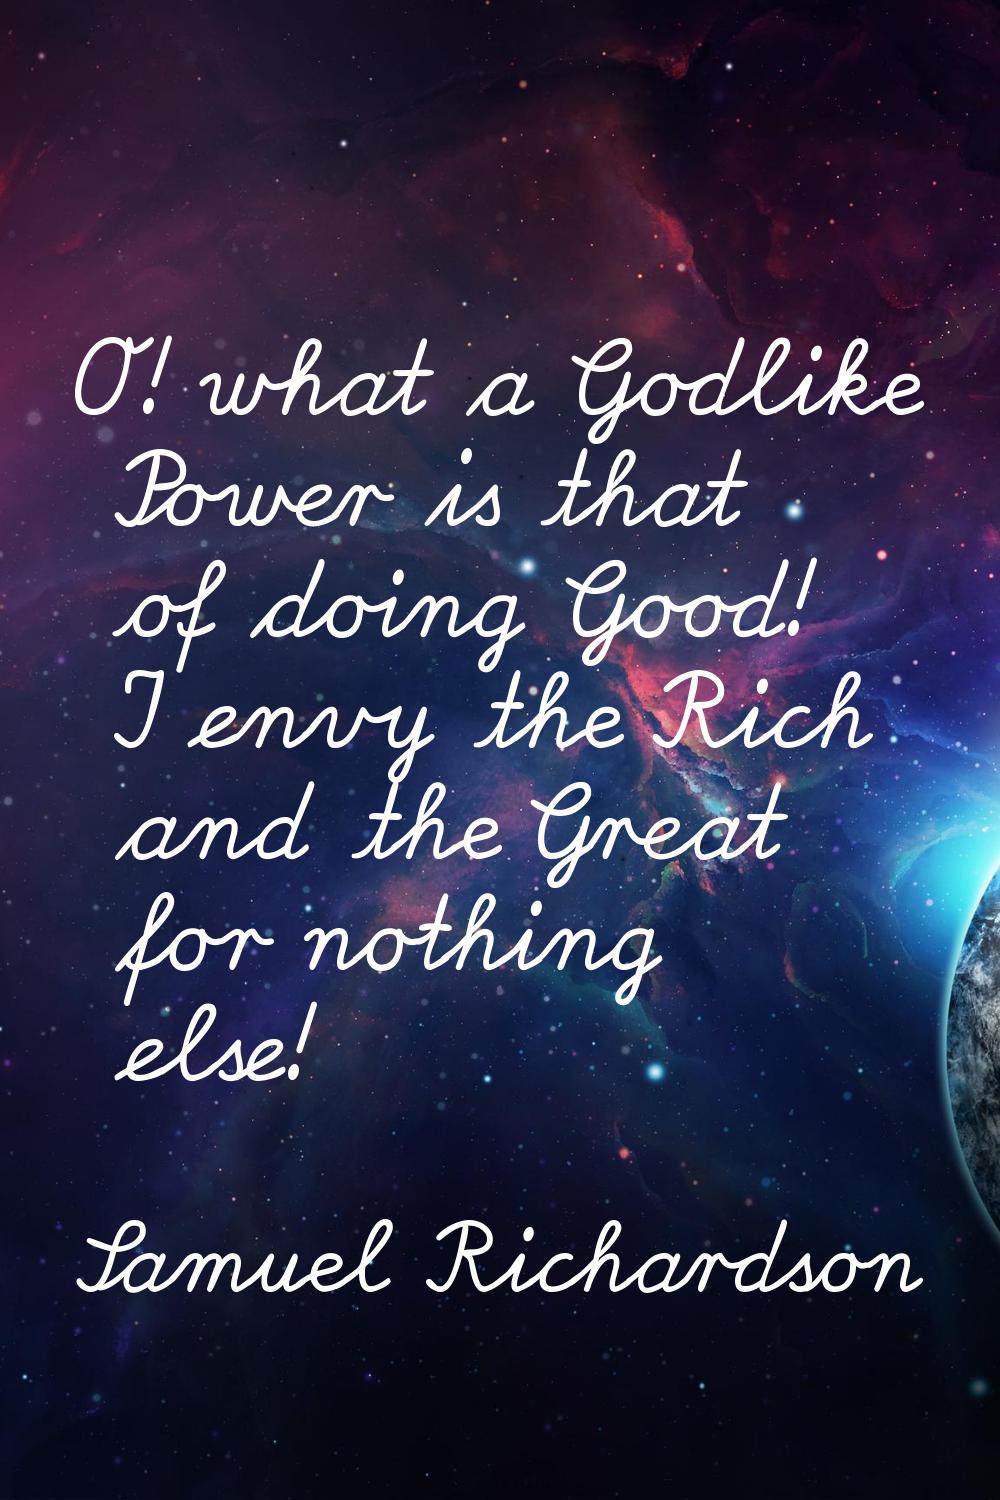 O! what a Godlike Power is that of doing Good! I envy the Rich and the Great for nothing else!